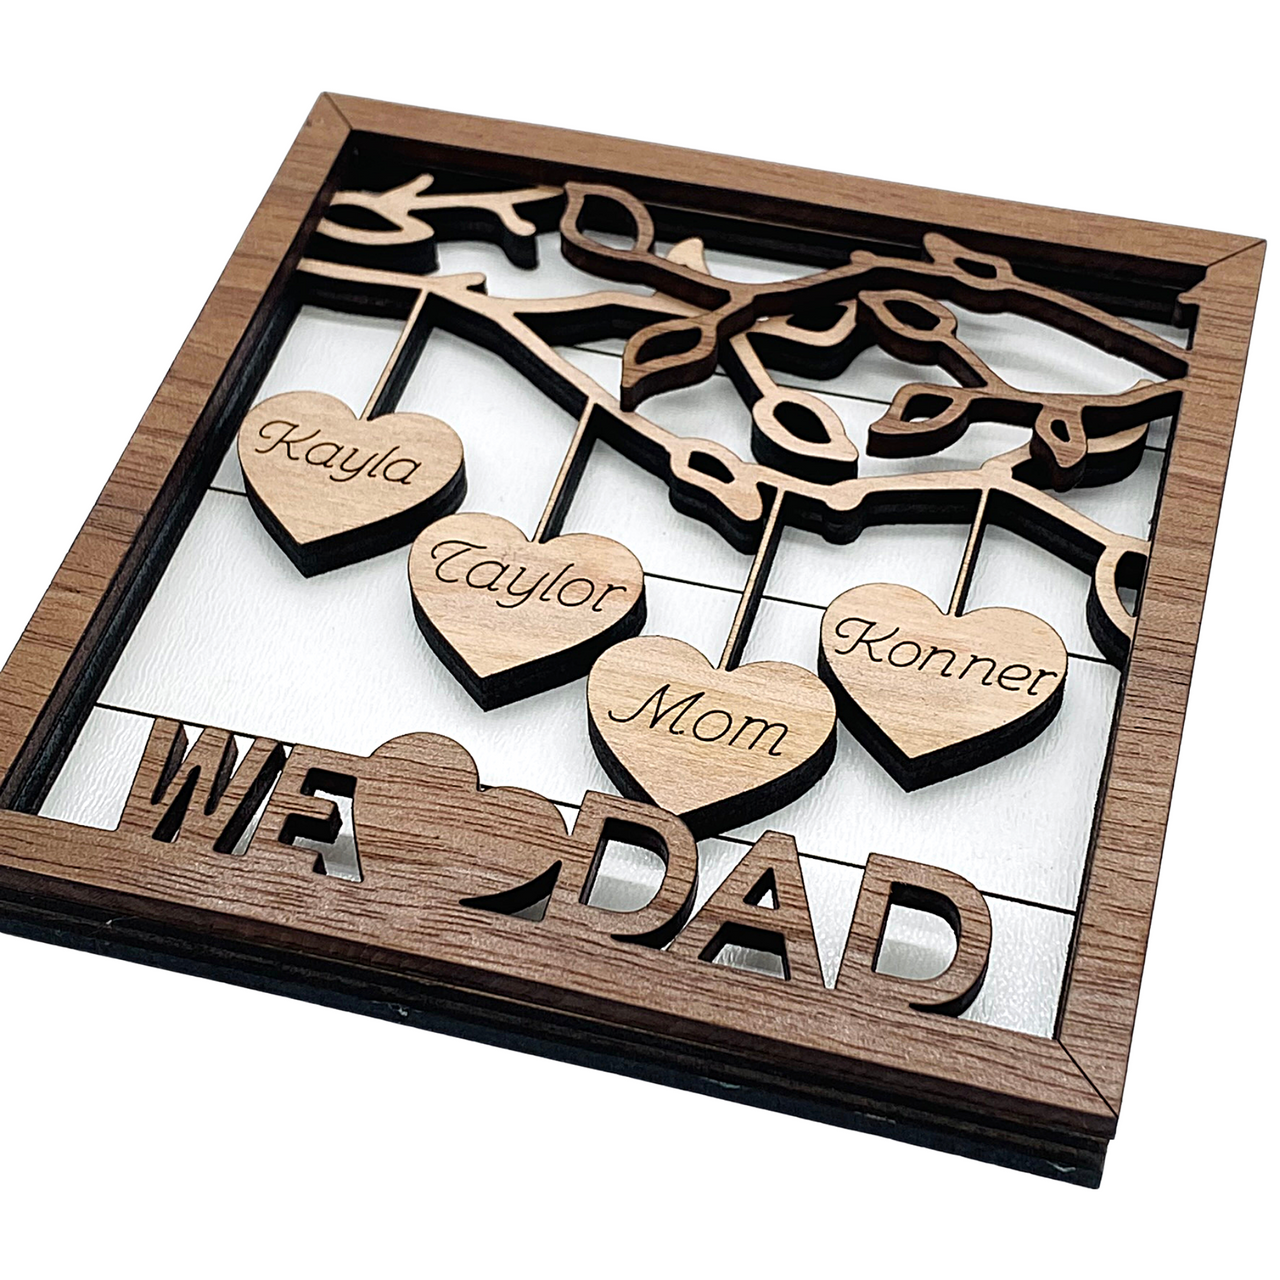 Personalization - Away - Away  Personalized fathers day gifts,  Personalised gifts for husband, Personalized father